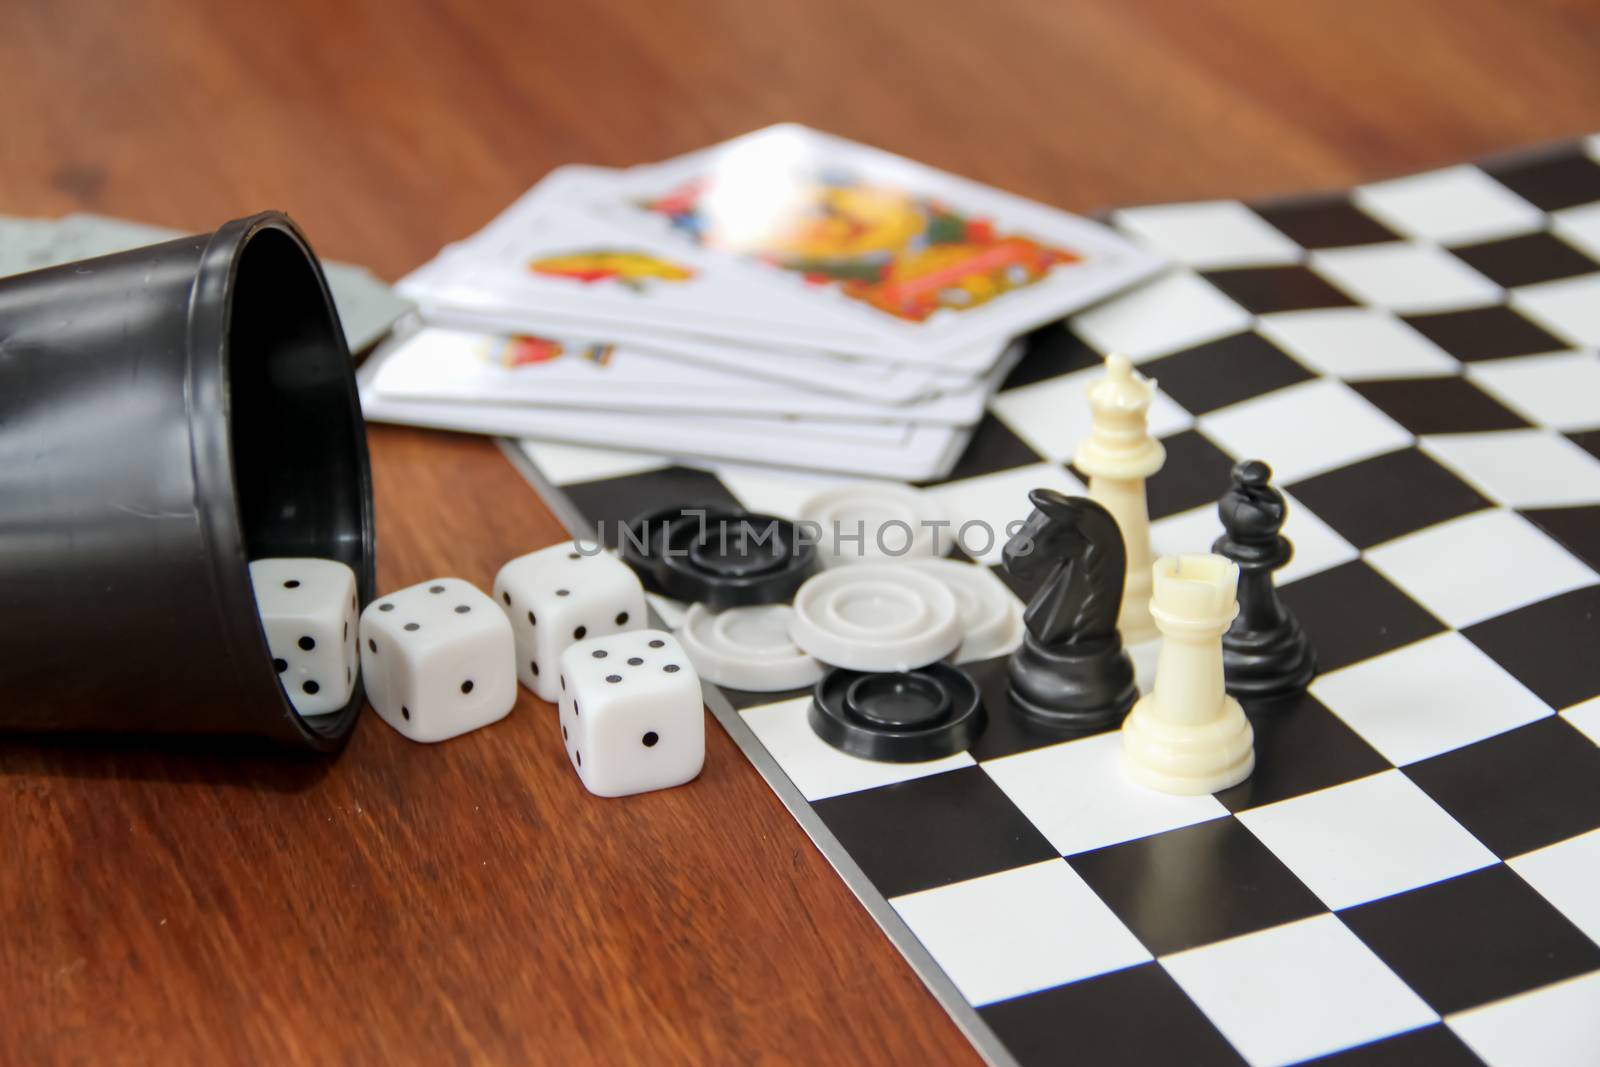 mix of goblet table games dice spanish poker cards chess and checkers